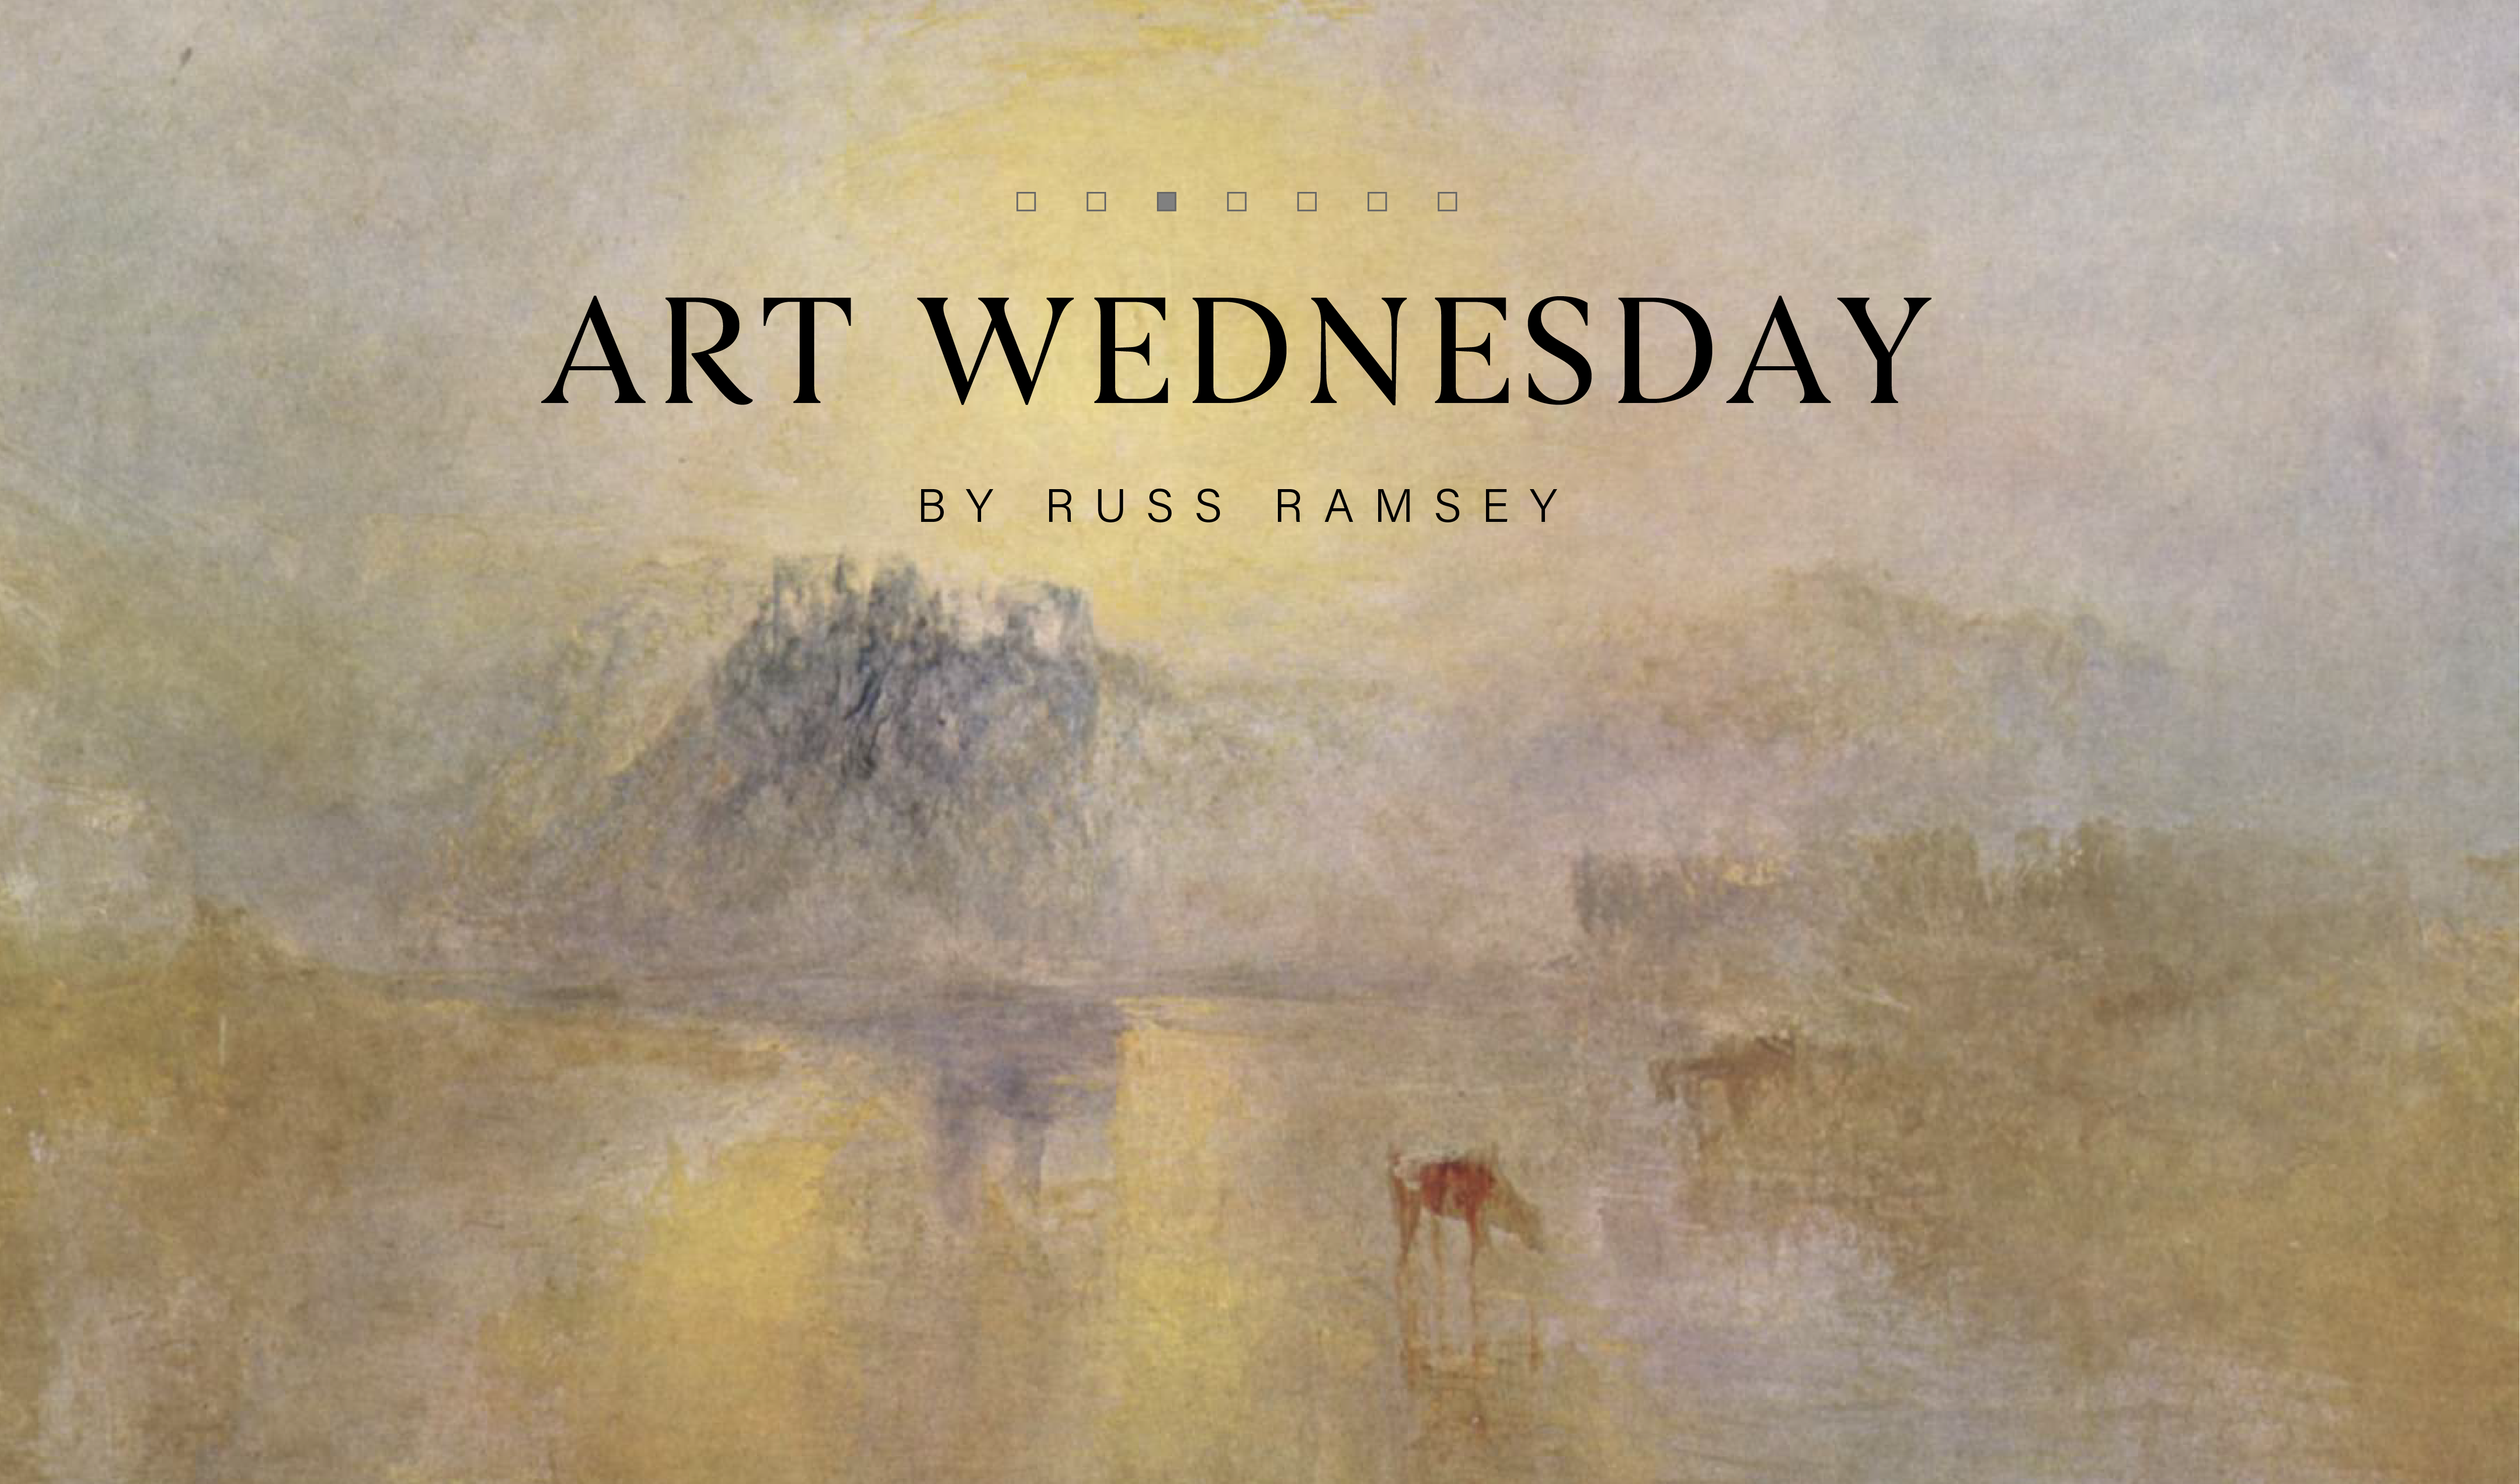 Welcome Art Wednesday by Russ Ramsey to Fathom